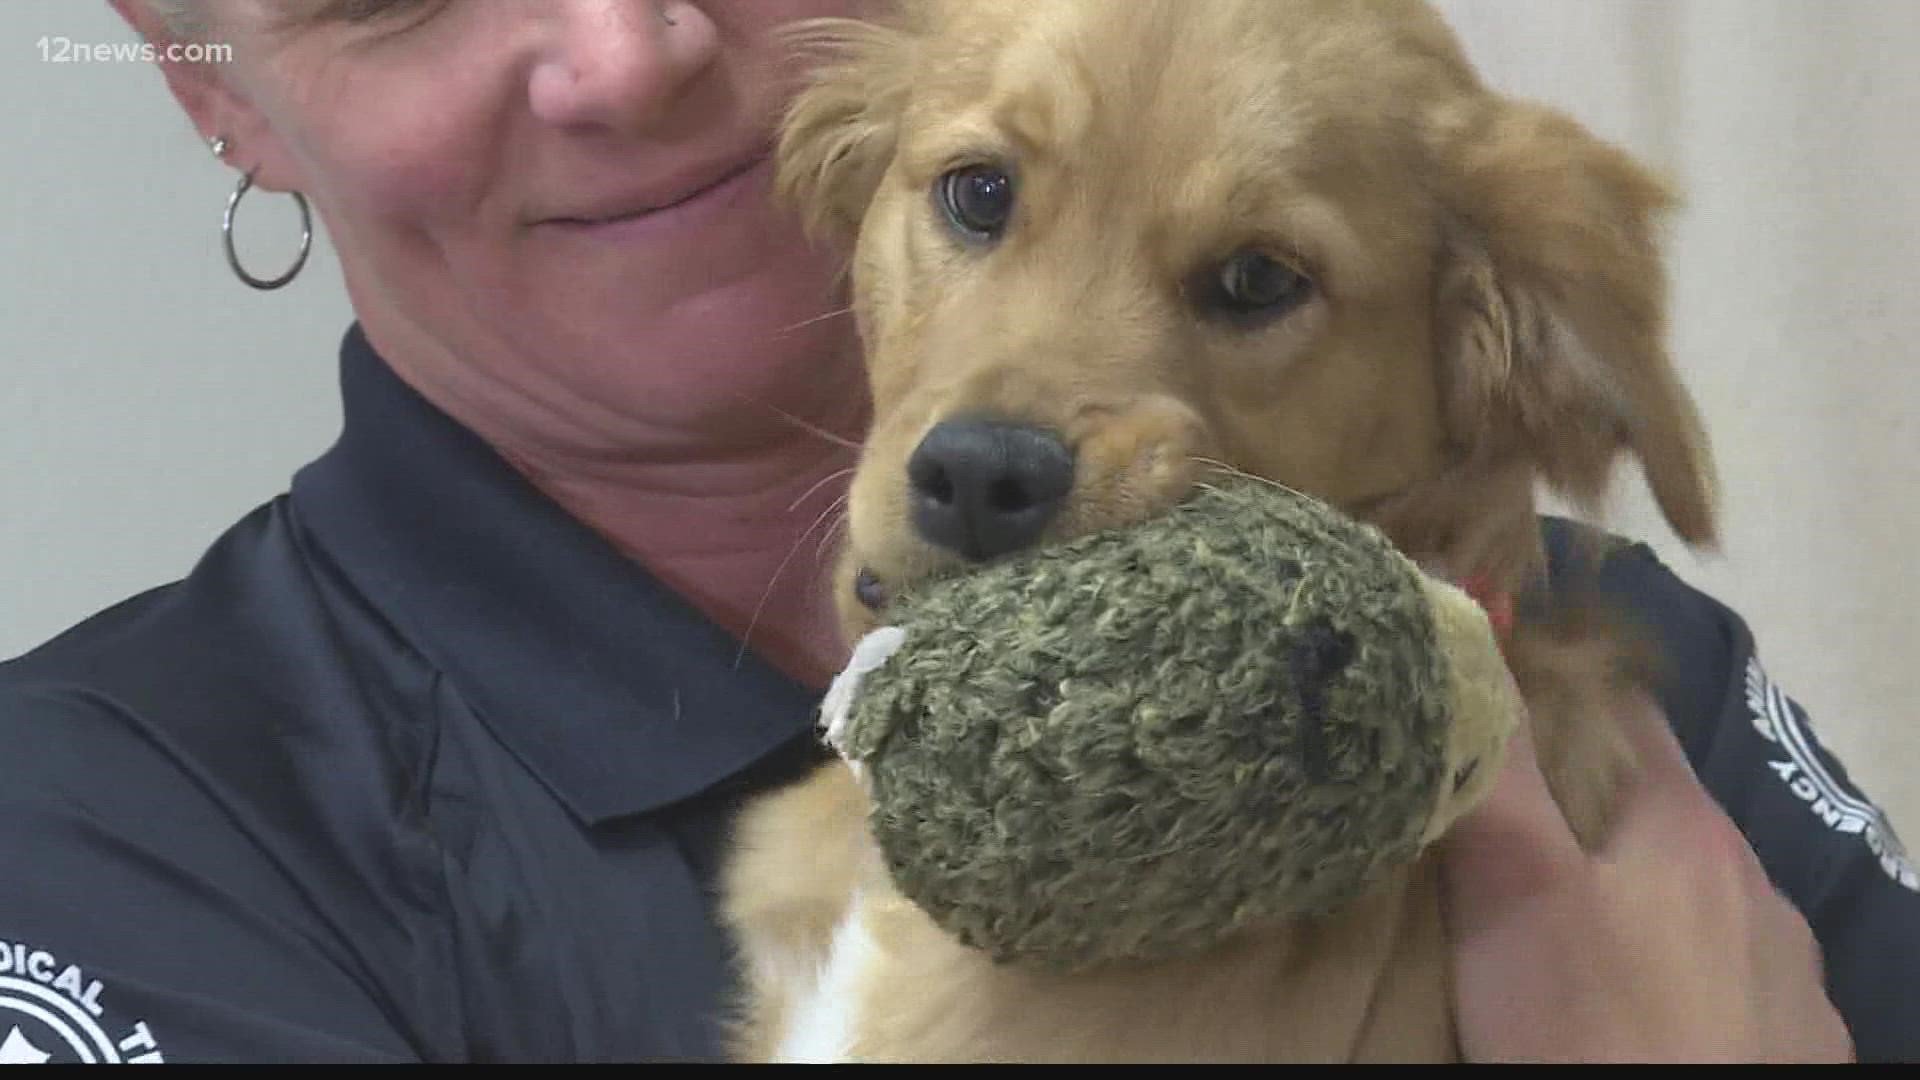 Golden Retriever 'Brutally Attacked' at Doggy Daycare Breaks Hearts